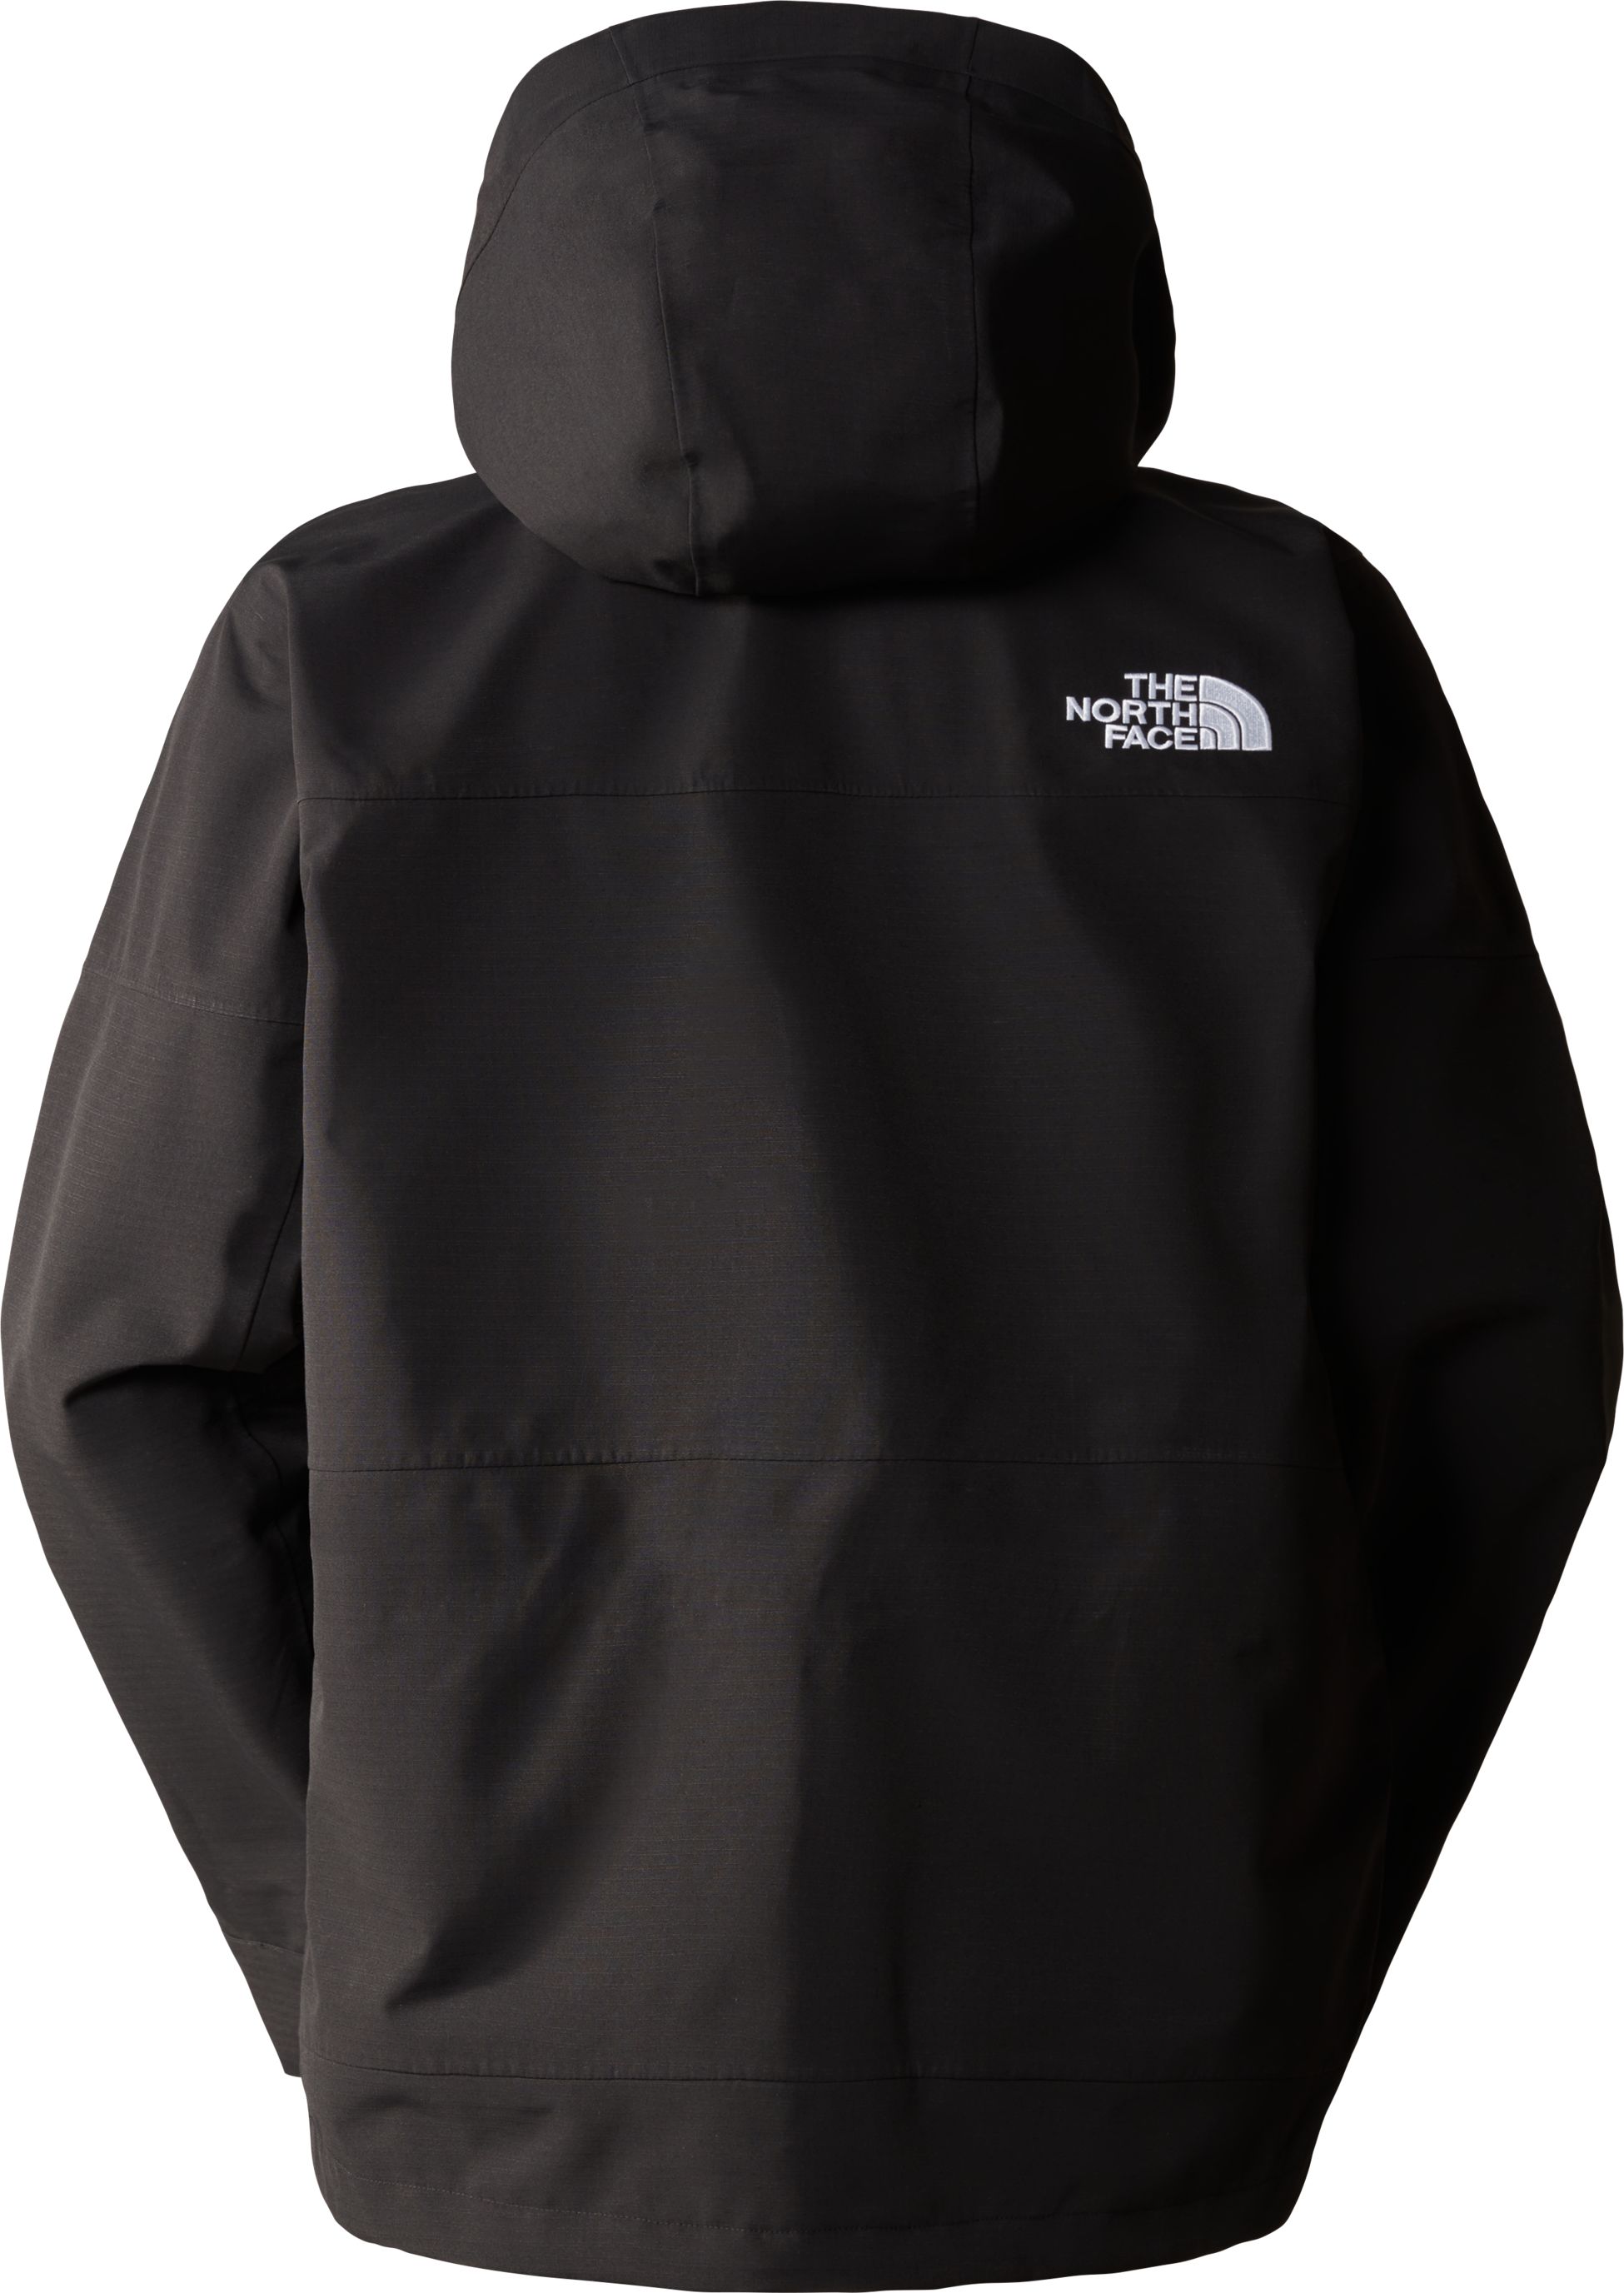 THE NORTH FACE, M DRAGLINE JACKET